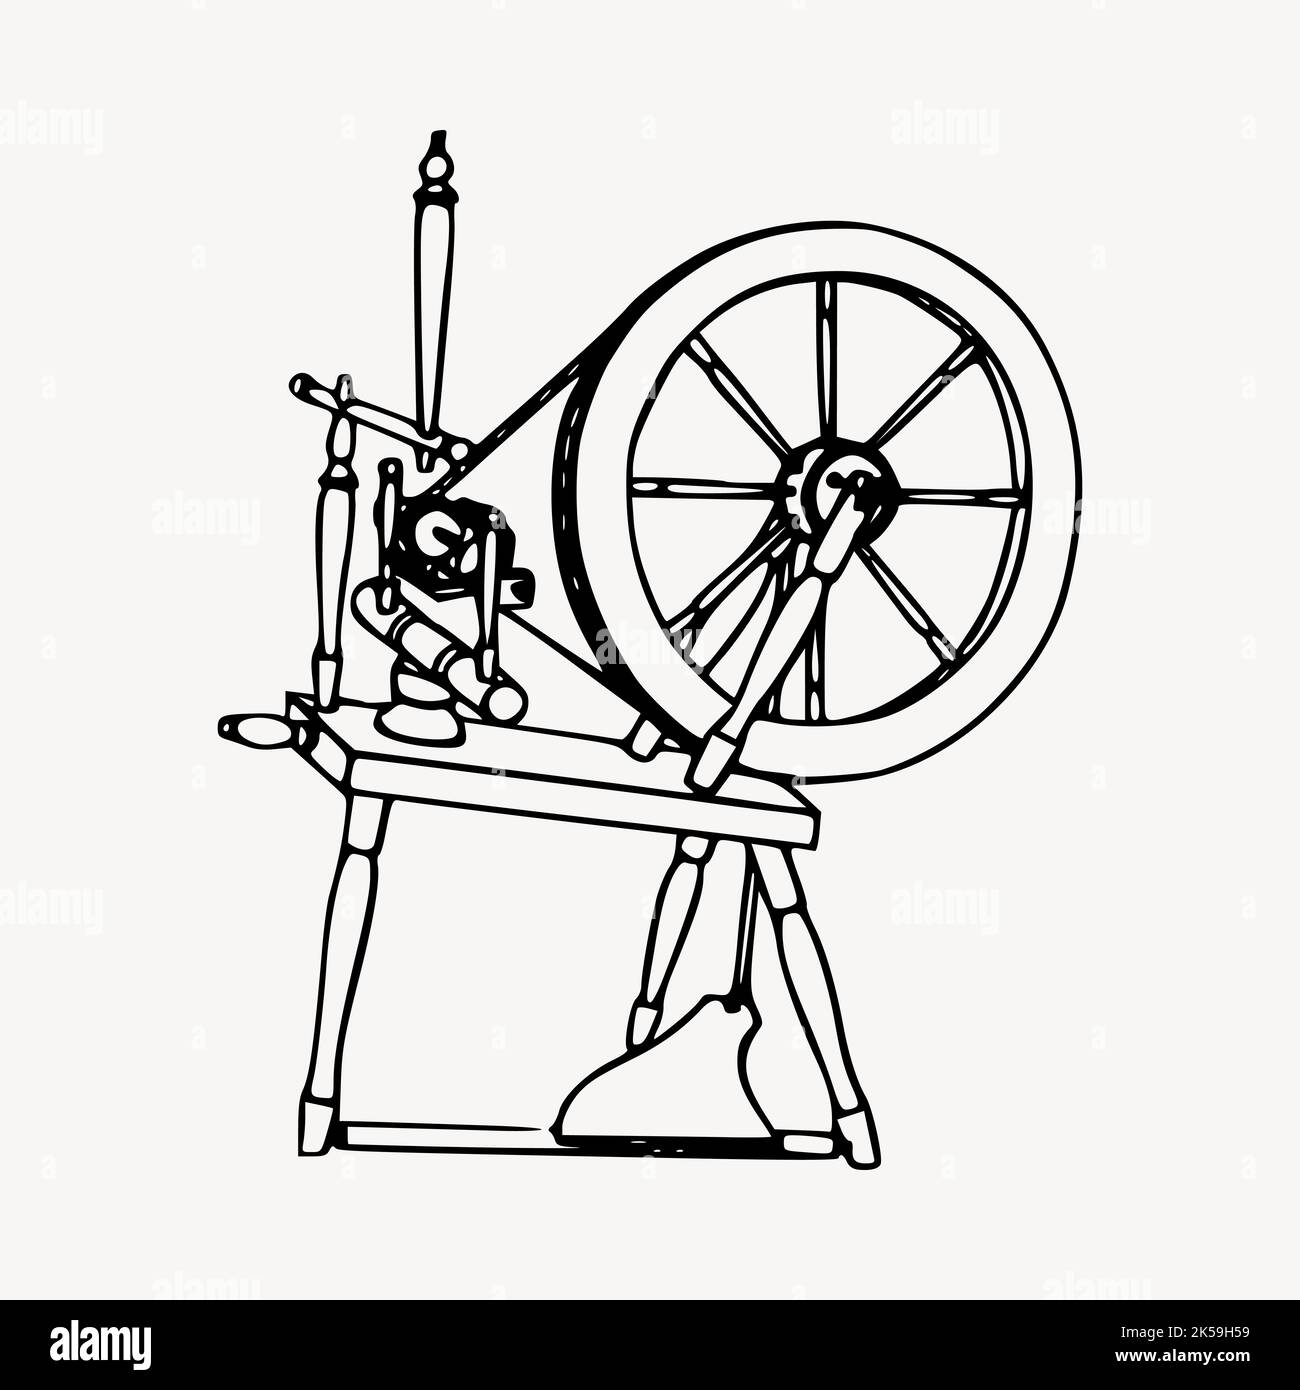 How to Draw Charkha Easy || Gandhi Jyanthi Special Drawing || Spinning  Wheel Drawing Easy - YouTube